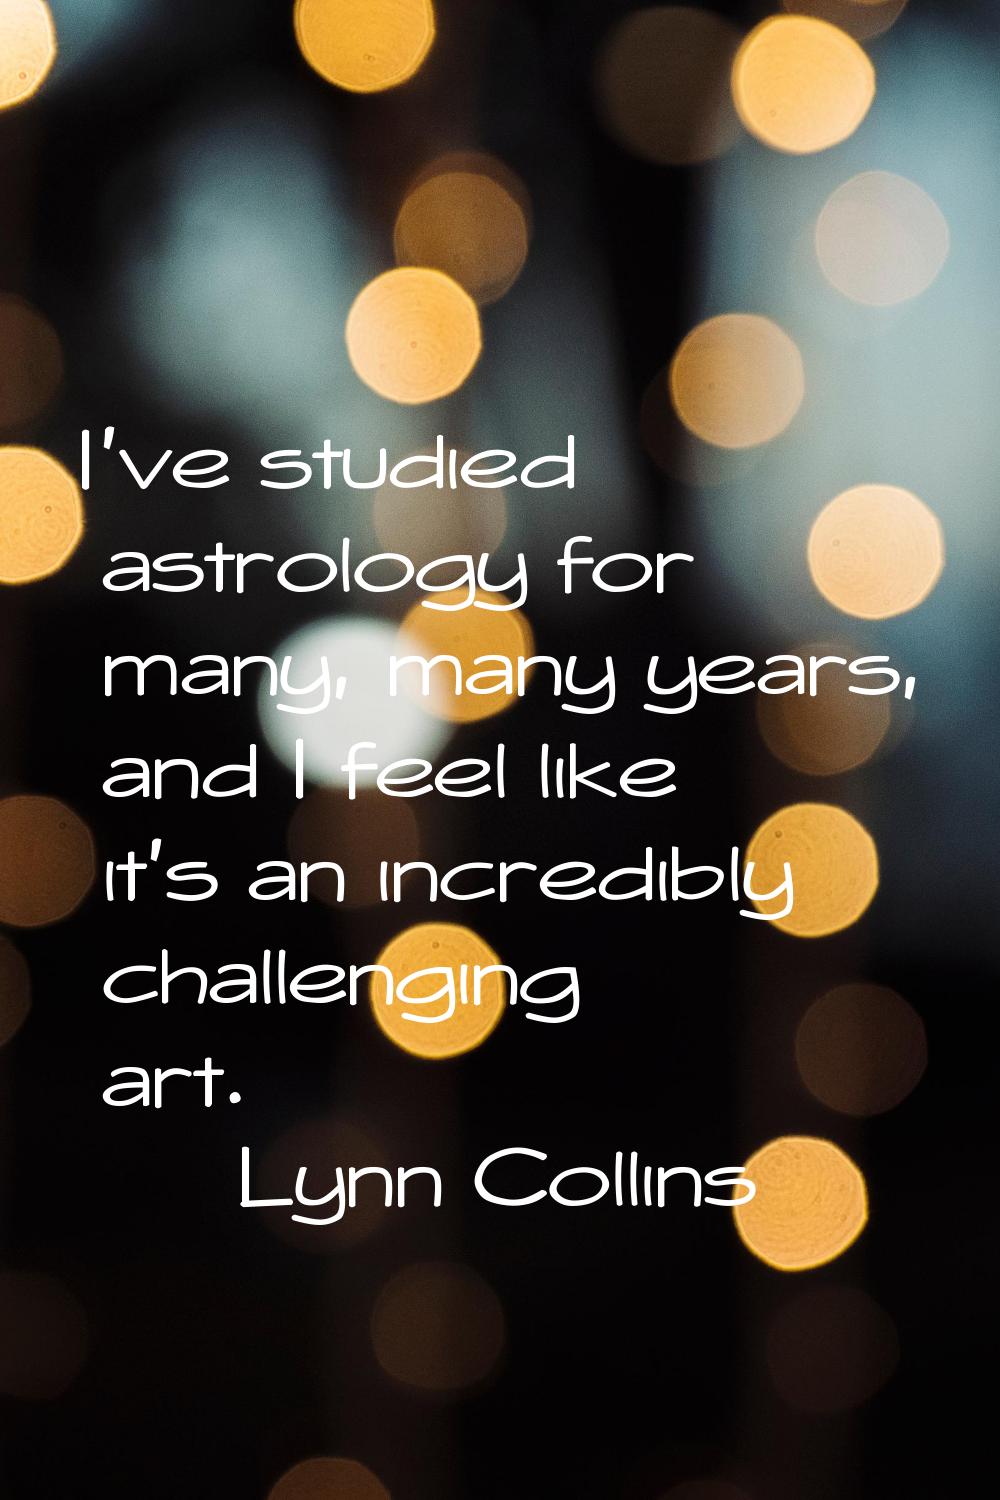 I've studied astrology for many, many years, and I feel like it's an incredibly challenging art.